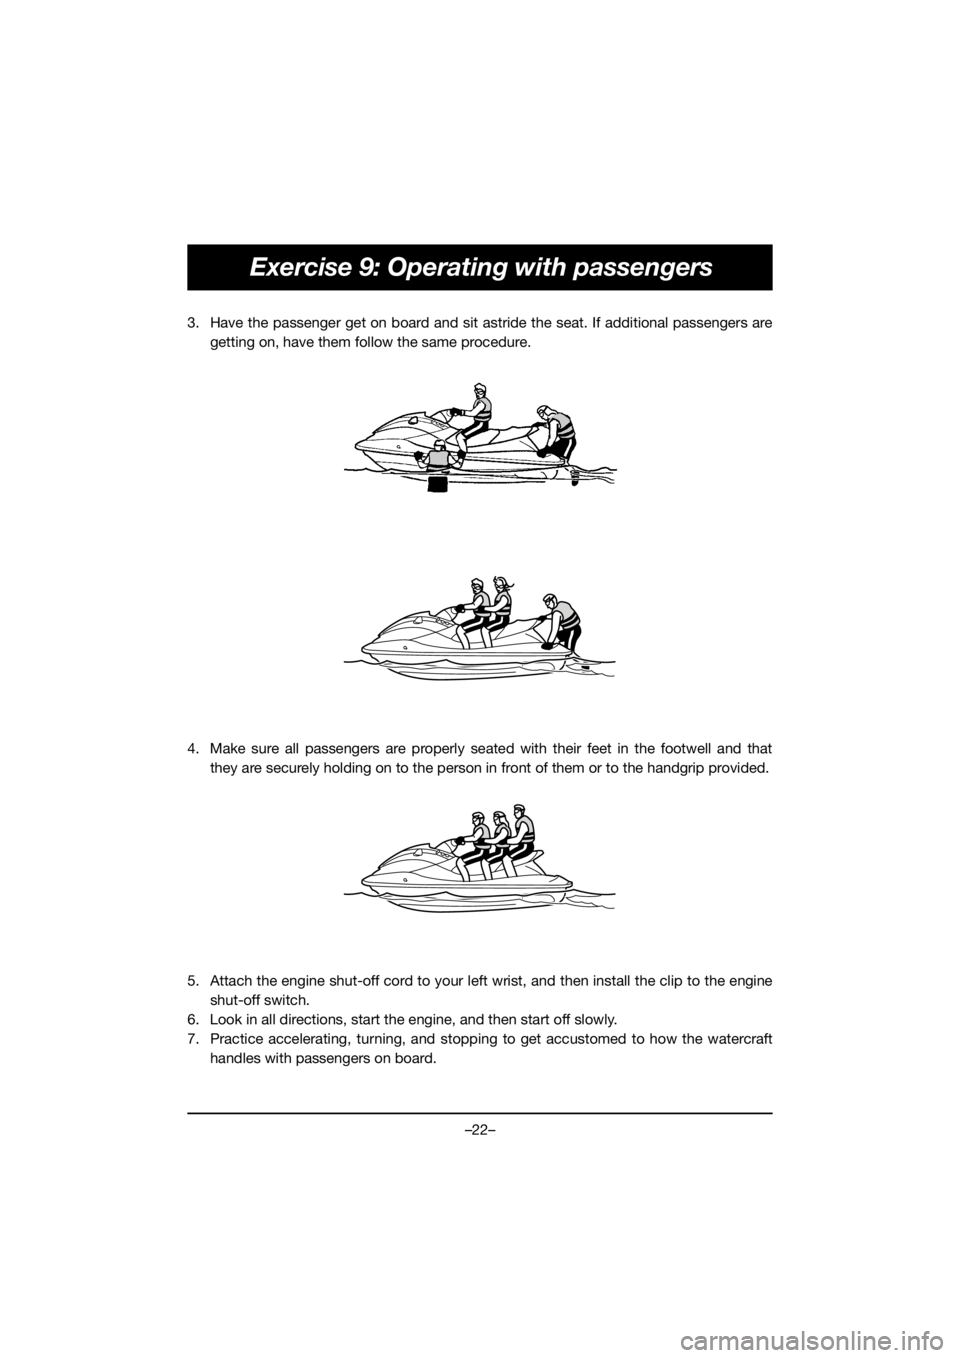 YAMAHA EX 2021  Manuale de Empleo (in Spanish) –22–
Exercise 9: Operating with passengers
3. Have the passenger get on board and sit astride the seat. If additional passengers aregetting on, have them follow the same procedure. 
4. Make sure a